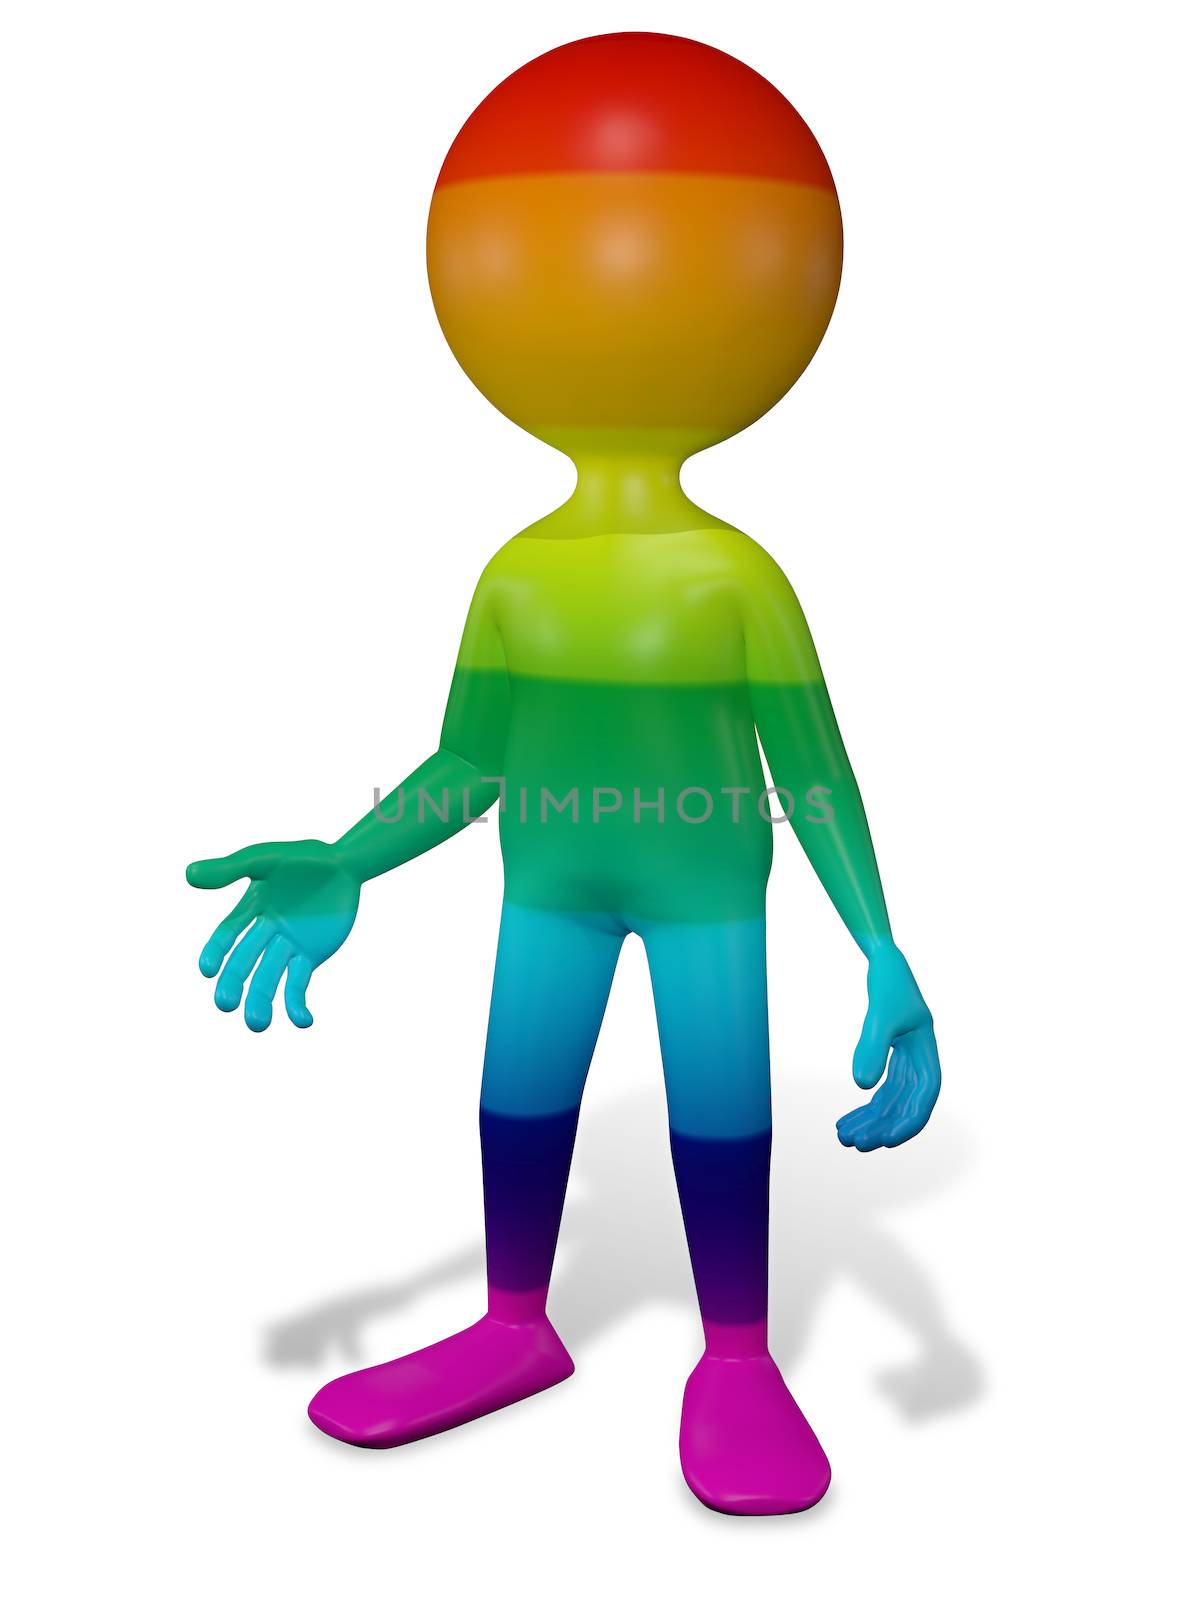 3d abstract illustration of a colorful man